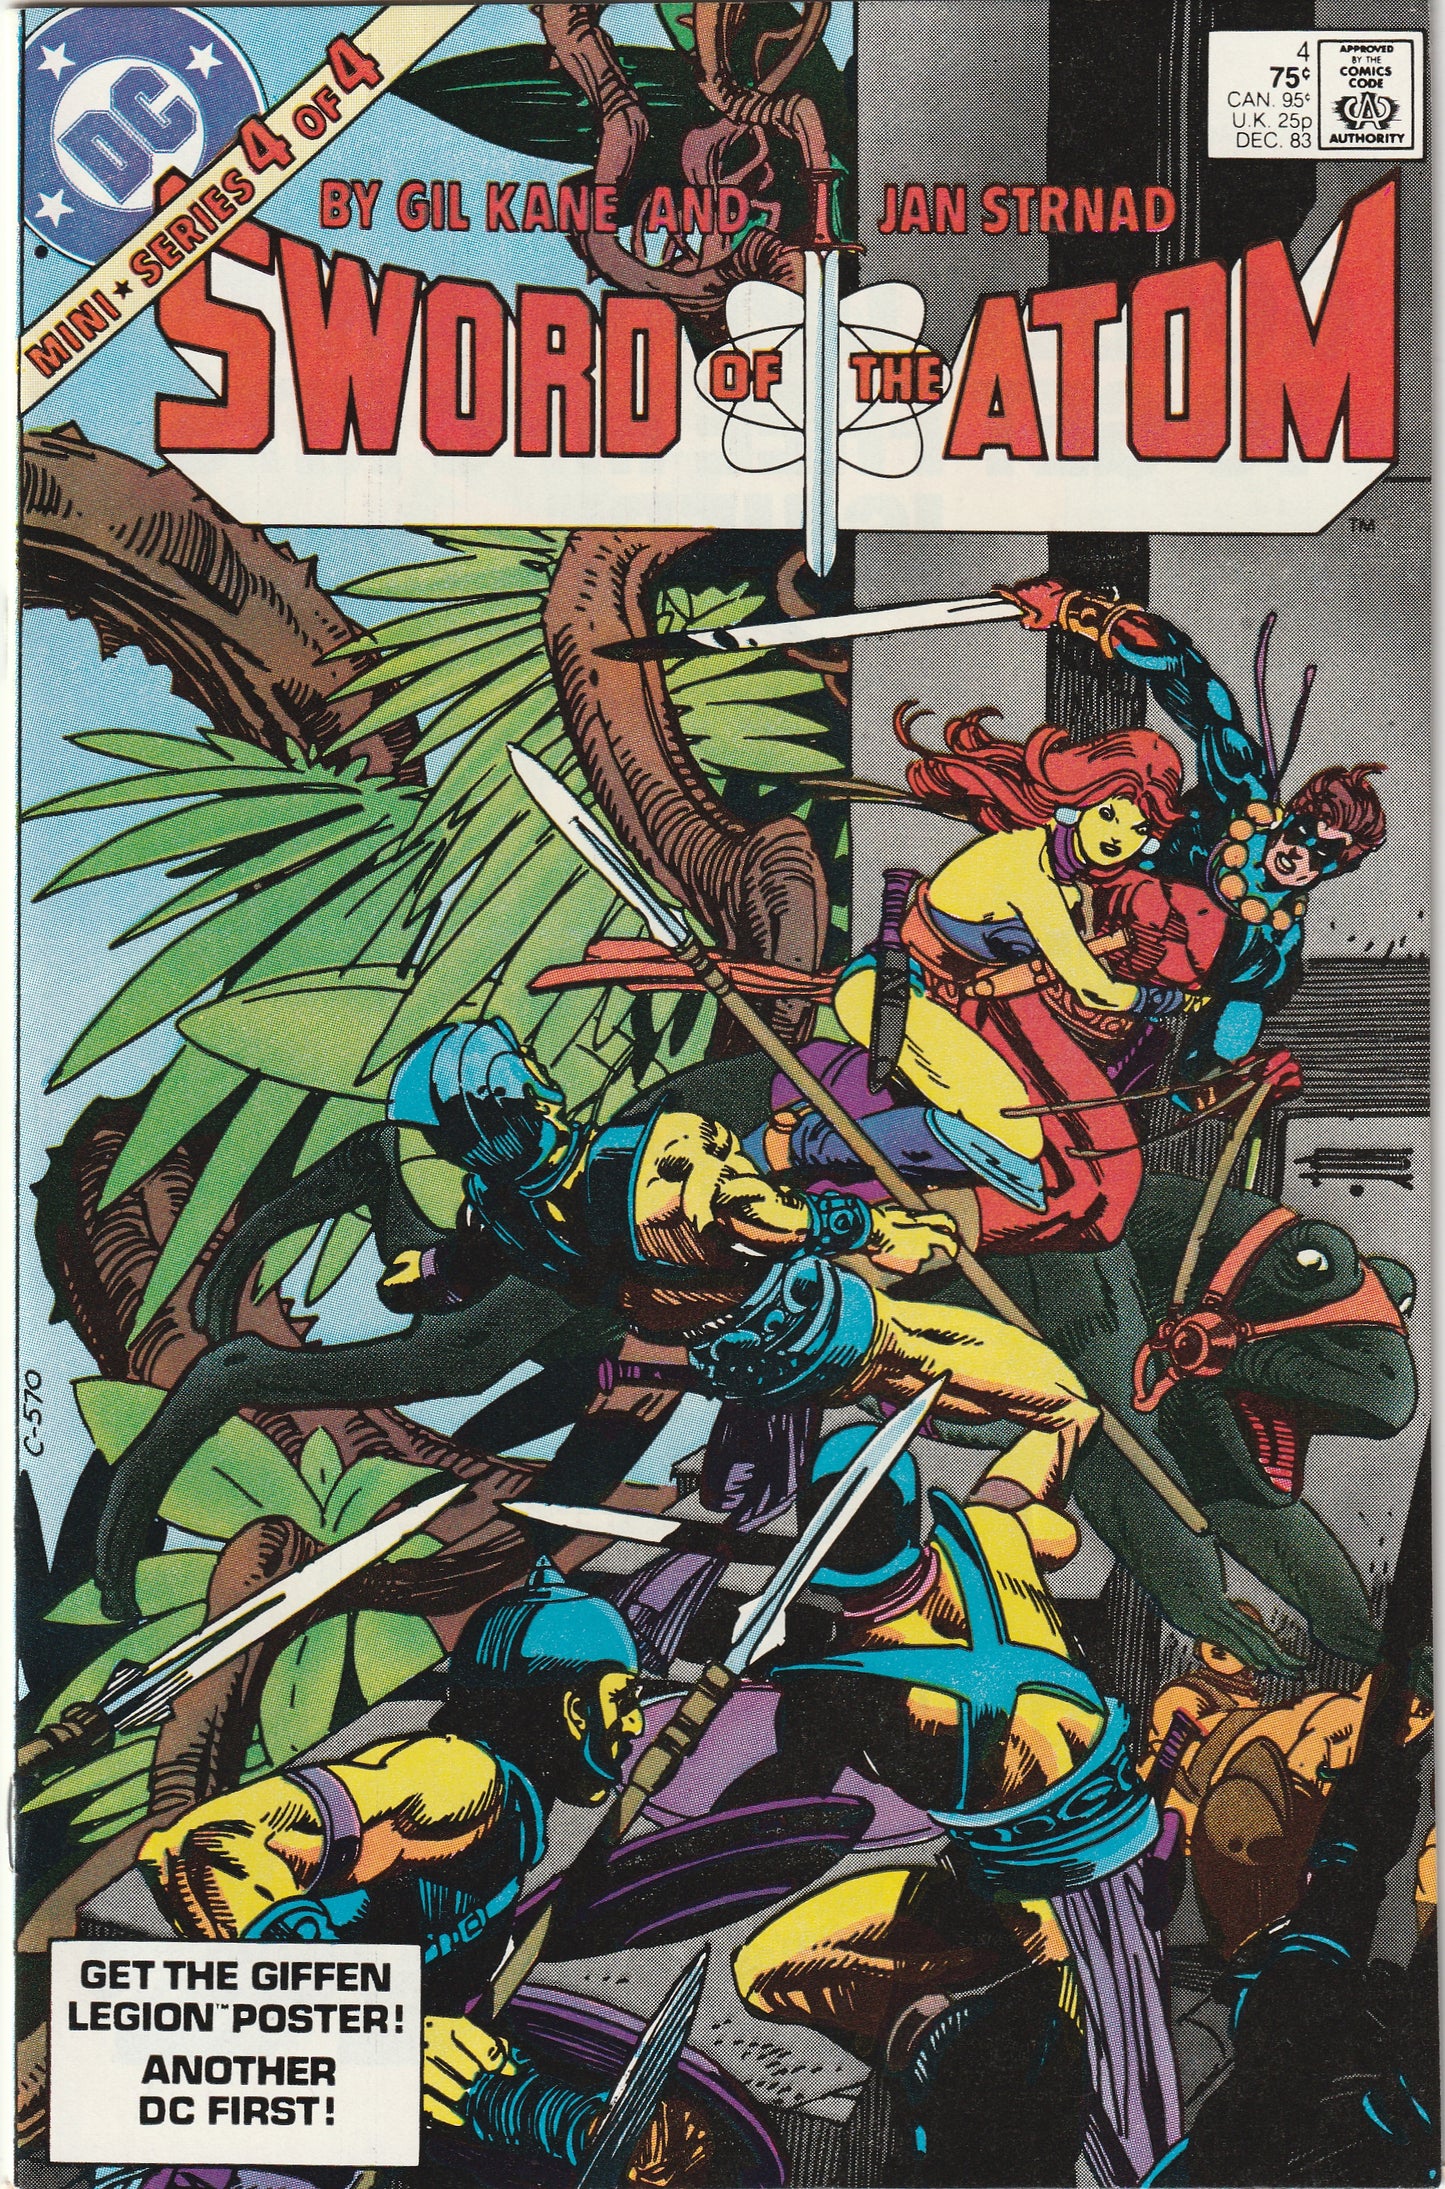 Sword of the Atom (1983) - Complete 4 issue mini-series